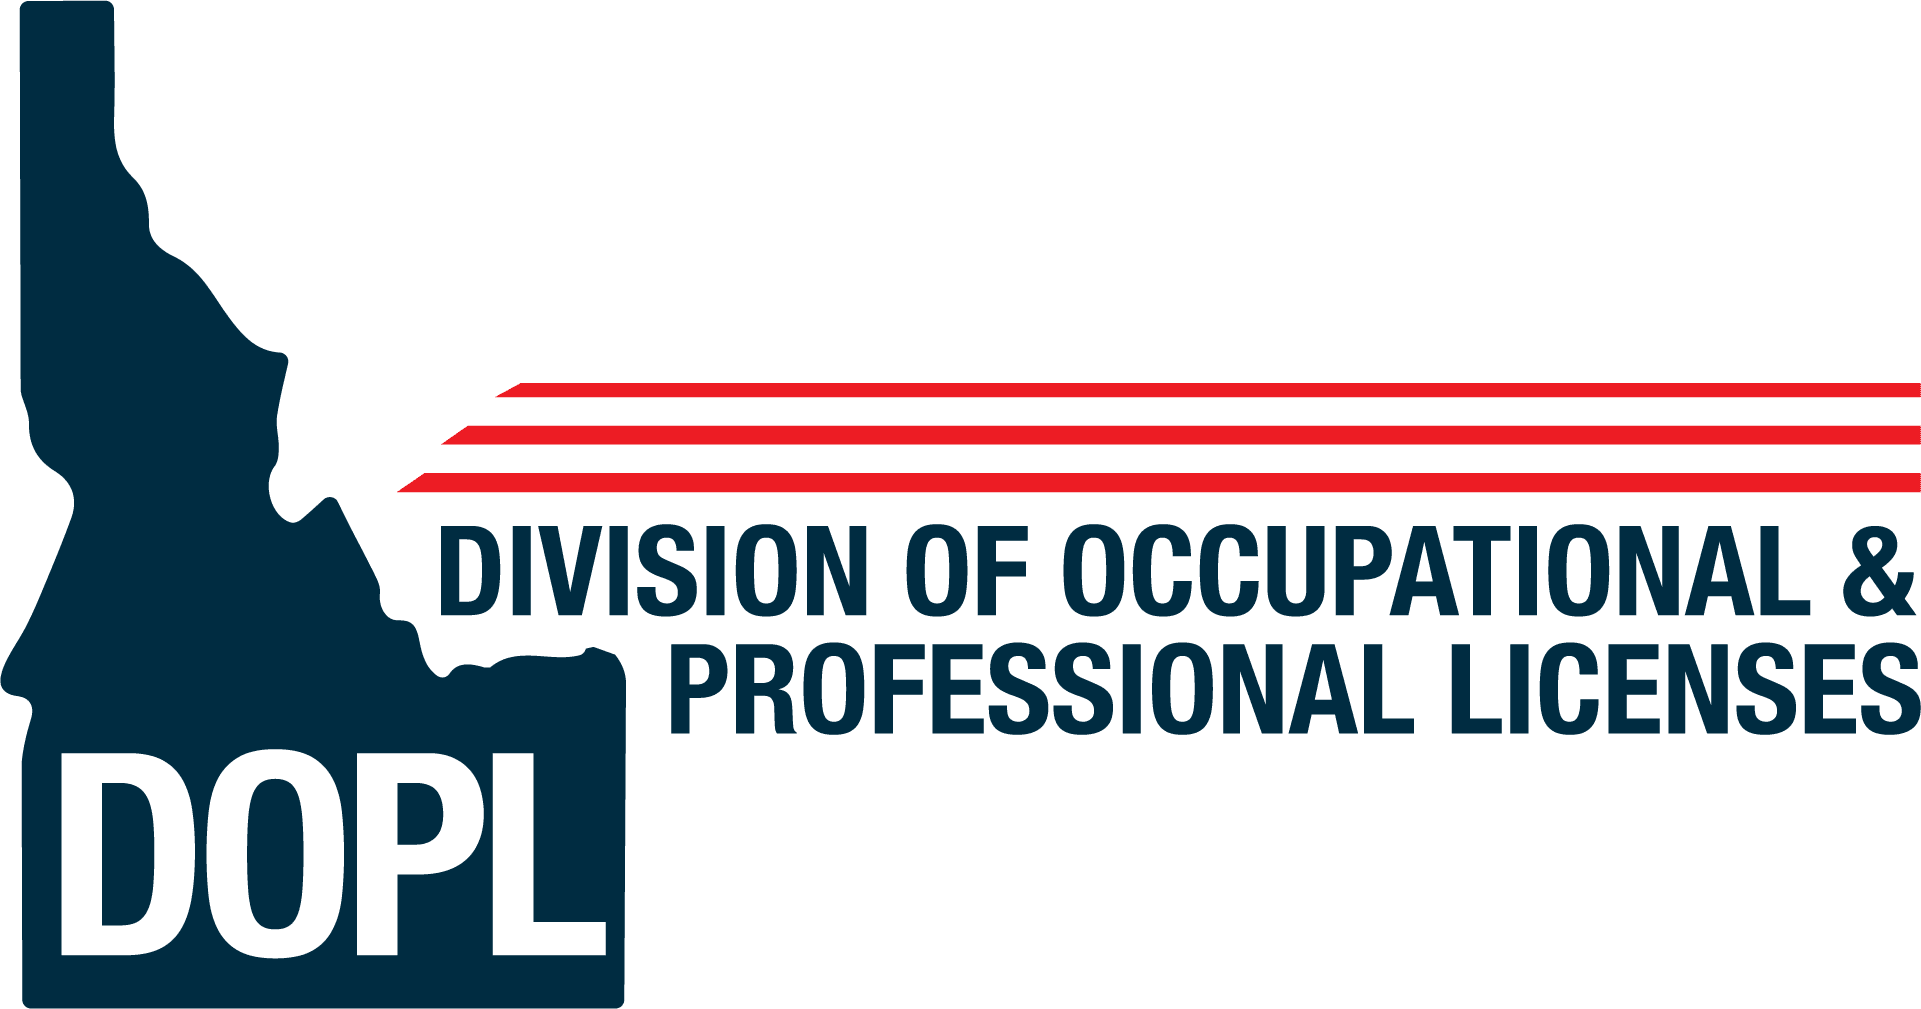 Get your electrical permit from the Idaho Division of Occupational & Professional Licenses (IDOPL)